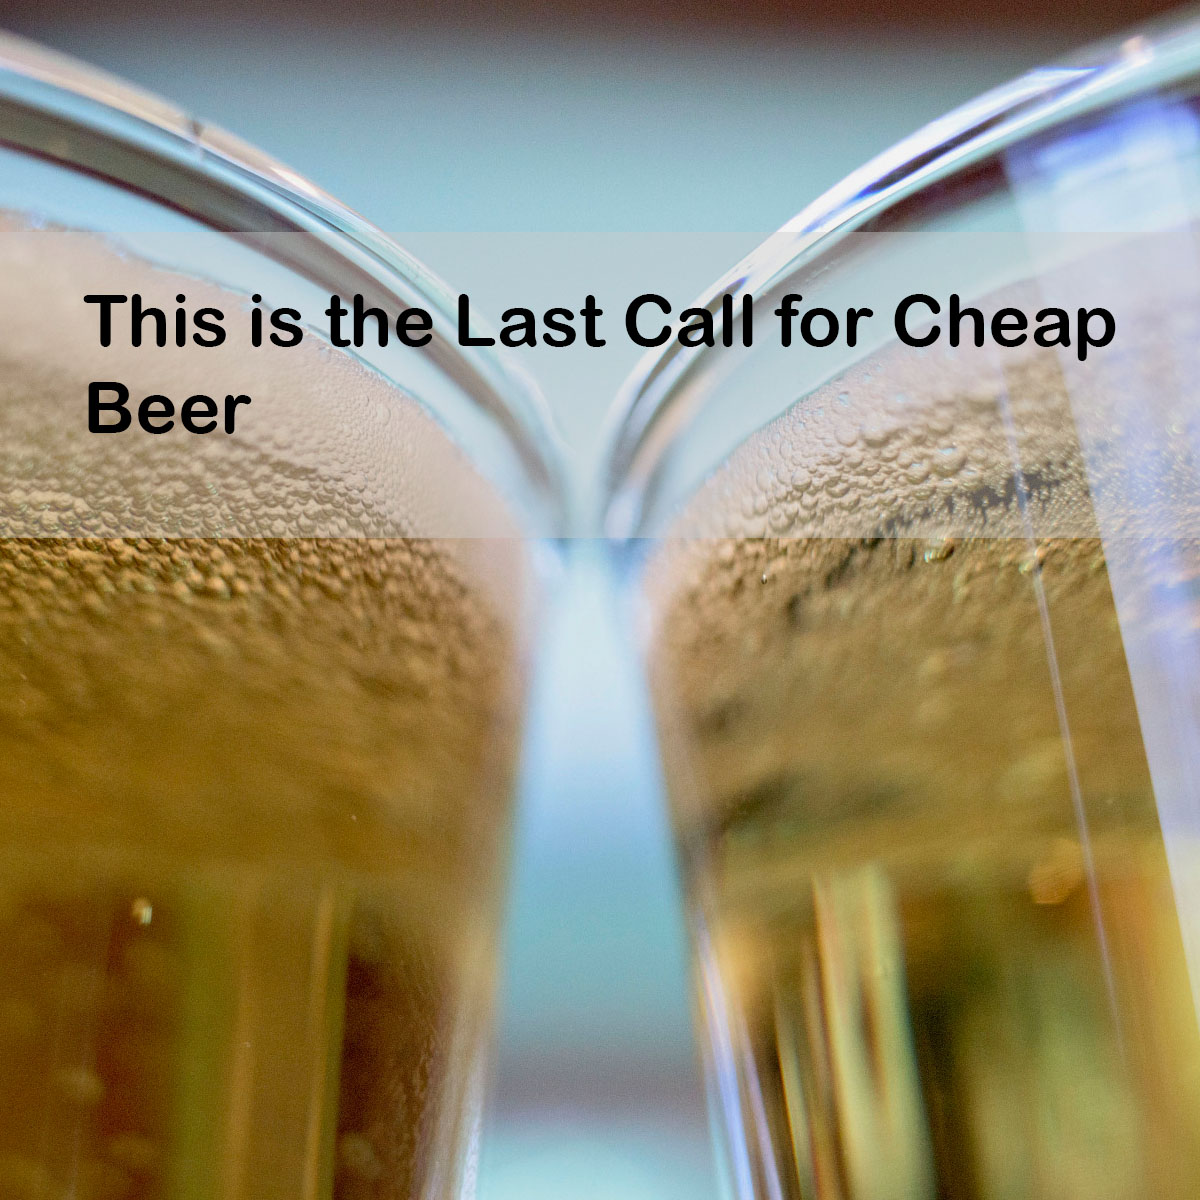 This is the Last Call for Cheap Beer